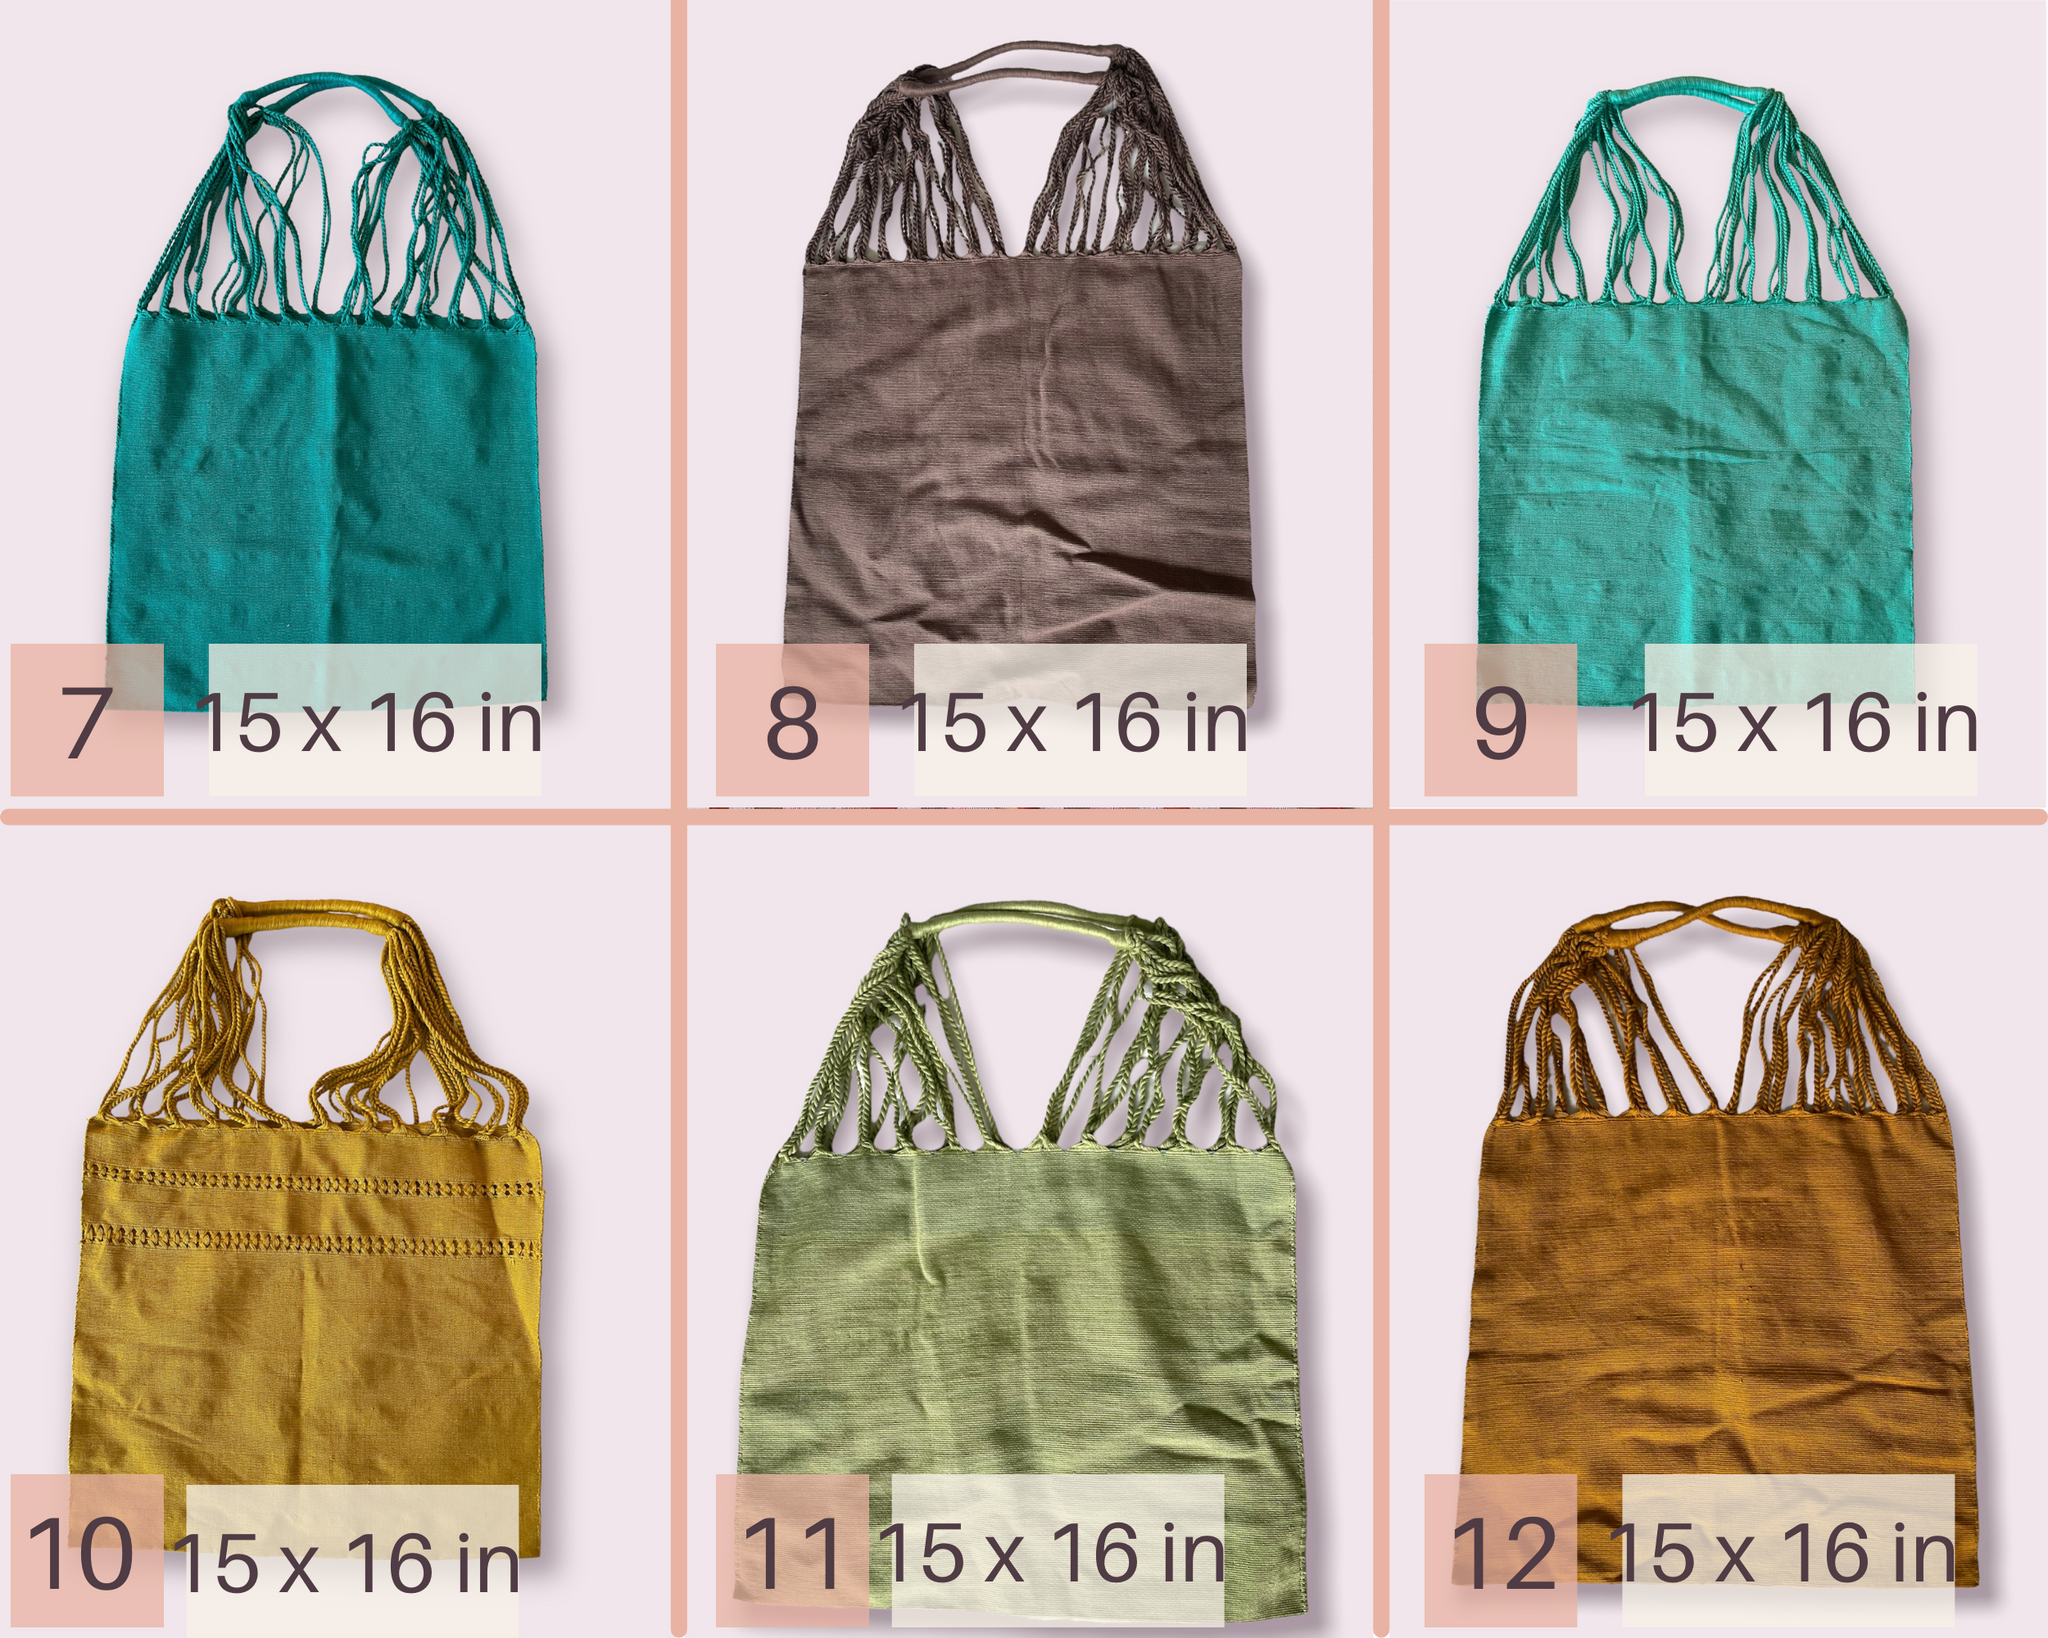 Mexican Cotton Loom Market Bag 16 x 14 in